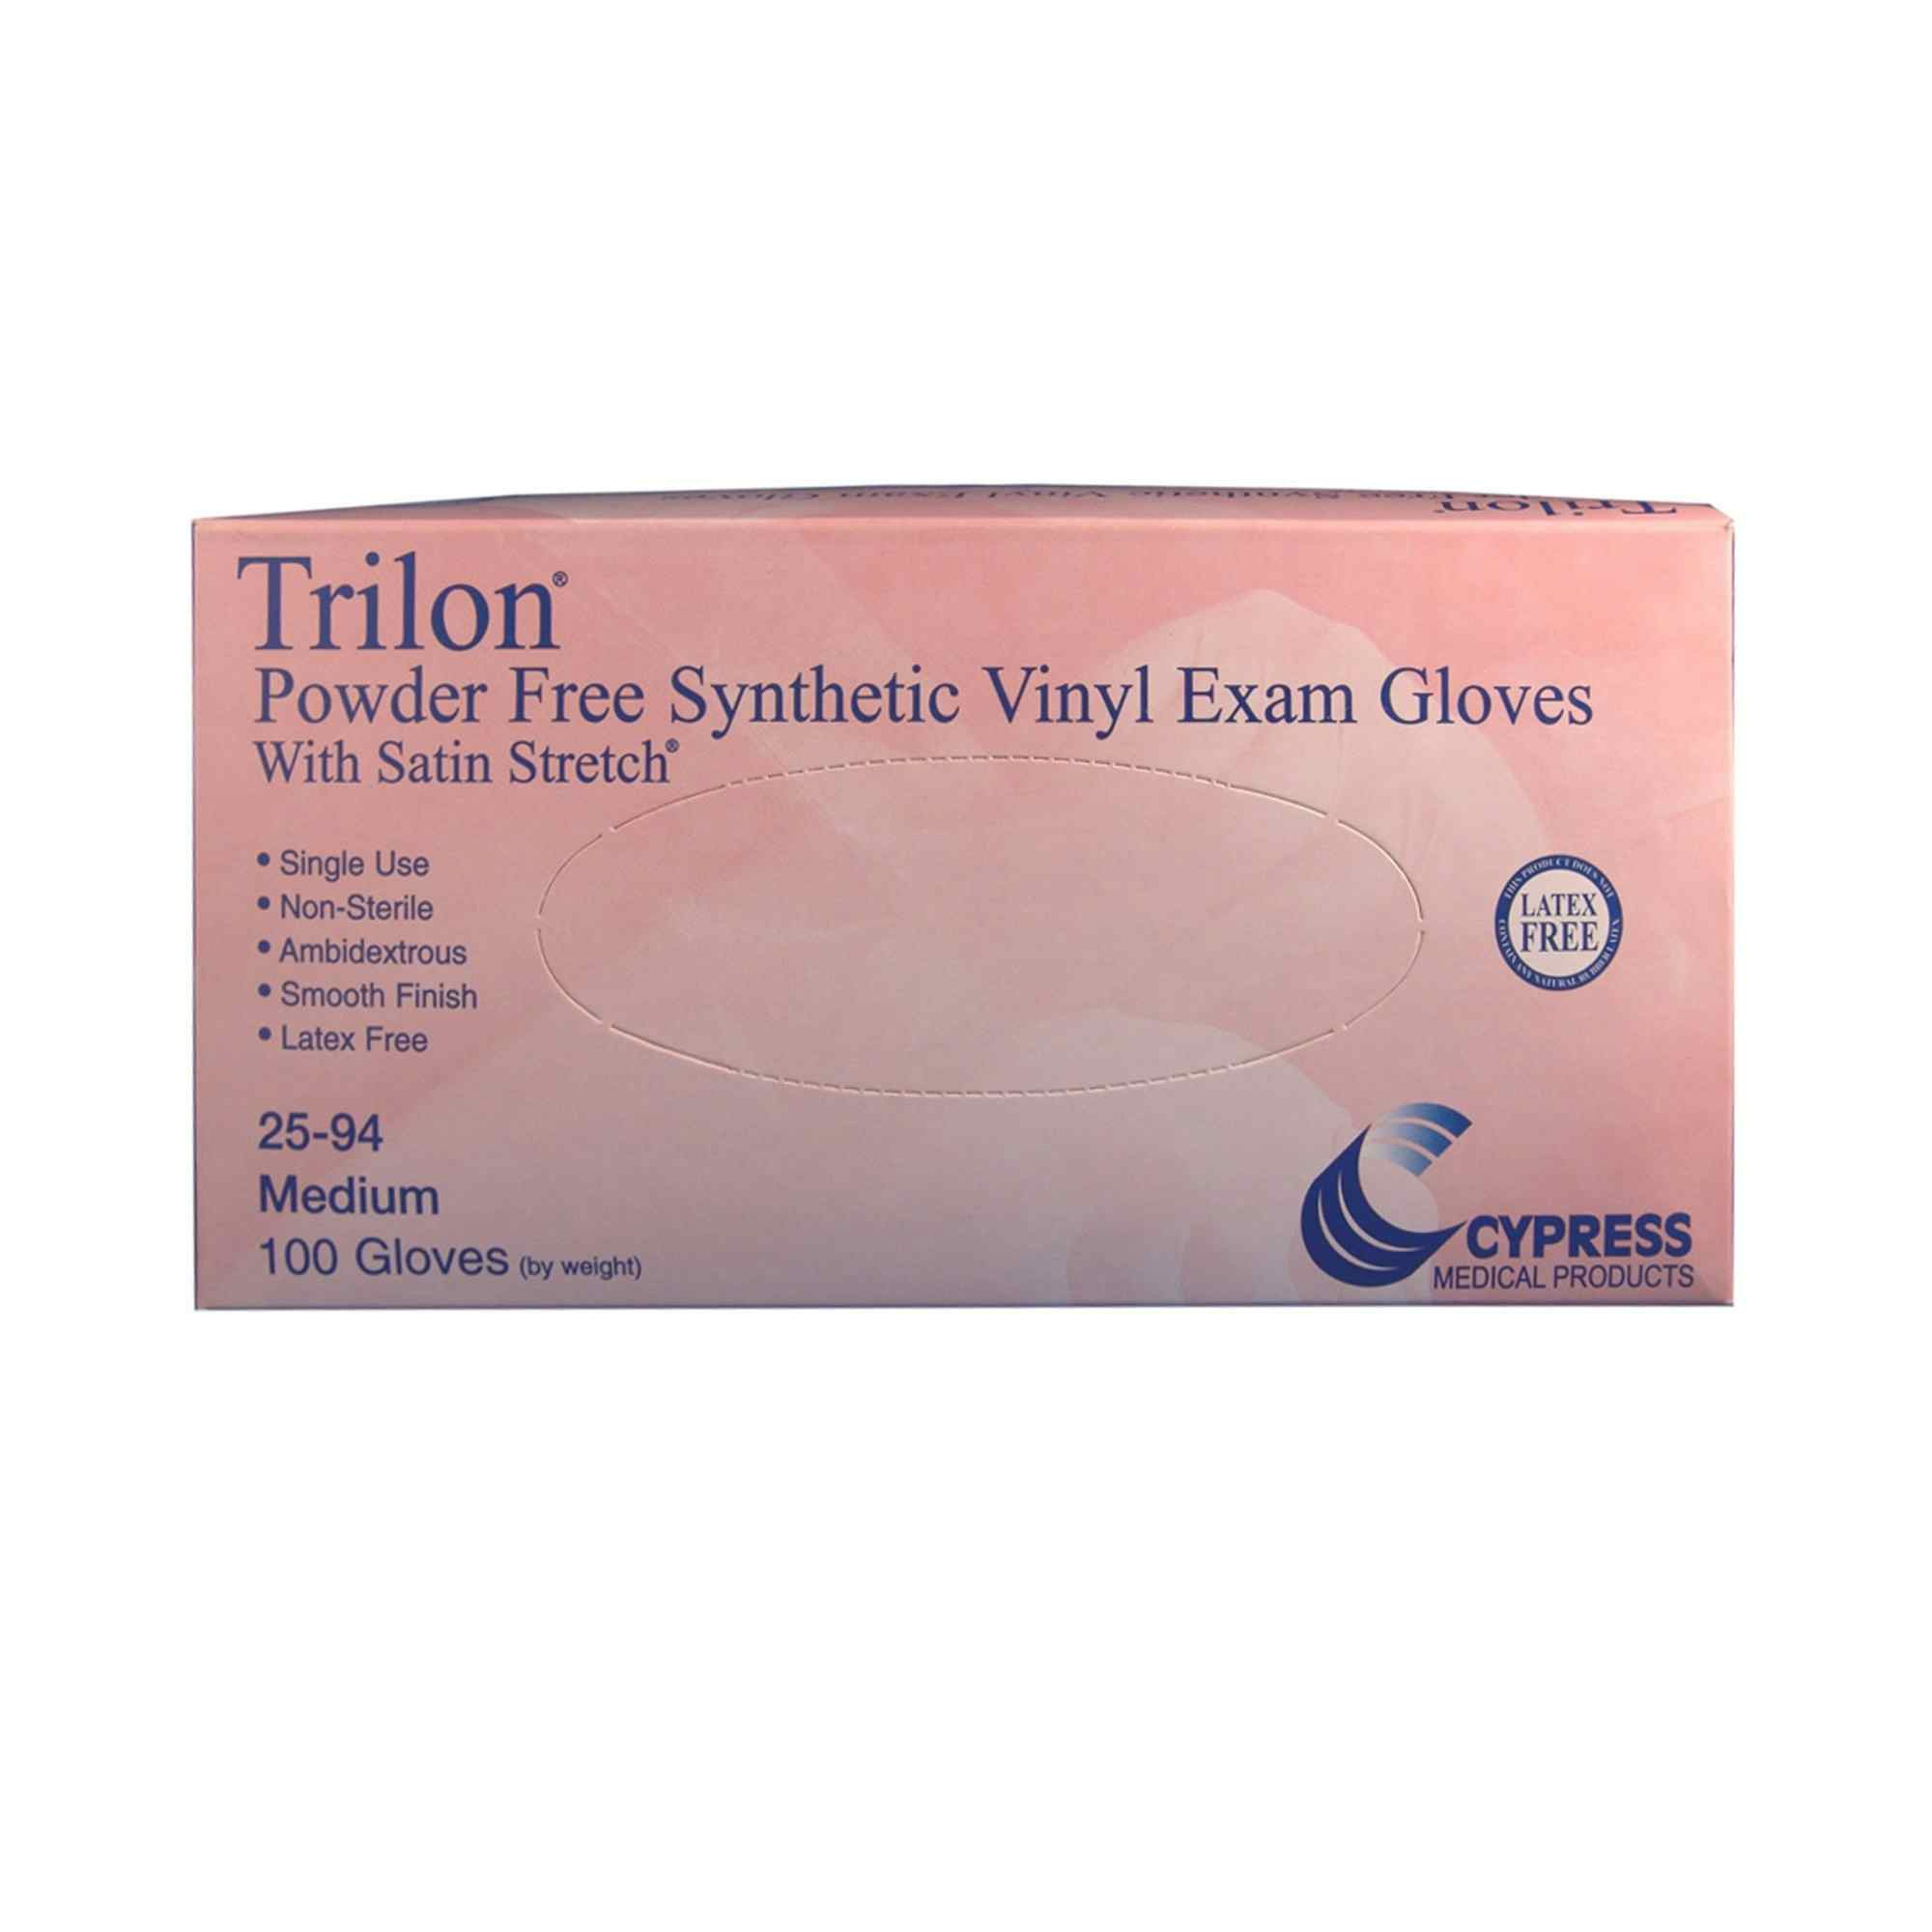 Trilon Powder Free Synthetic Vinyl Exam Glove, Clear, 25-98, X-Large - Case of 1000